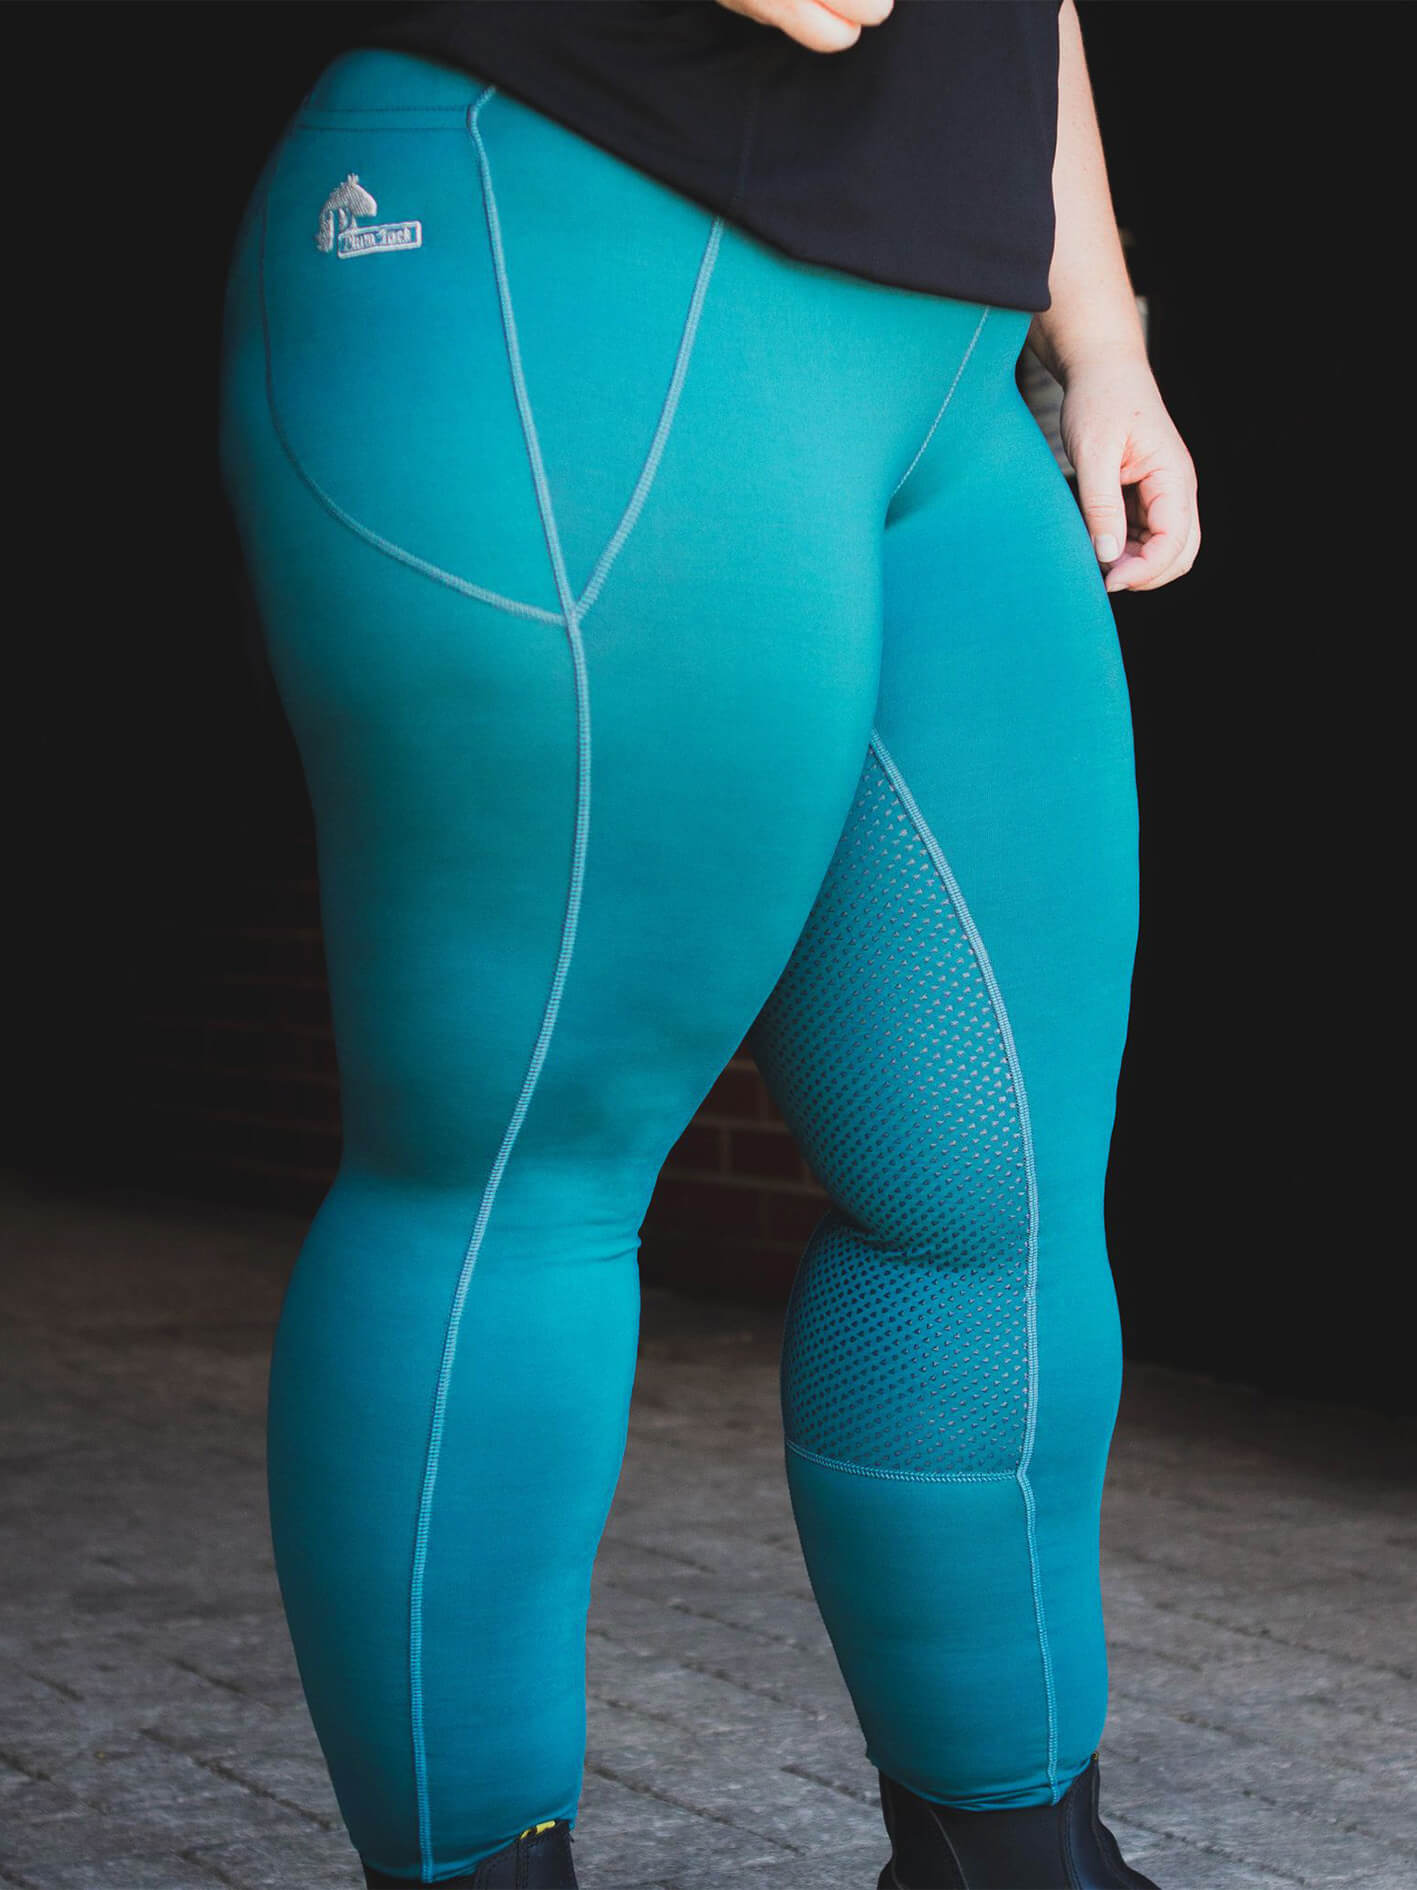 Person wearing blue horse riding tights with mesh panels.